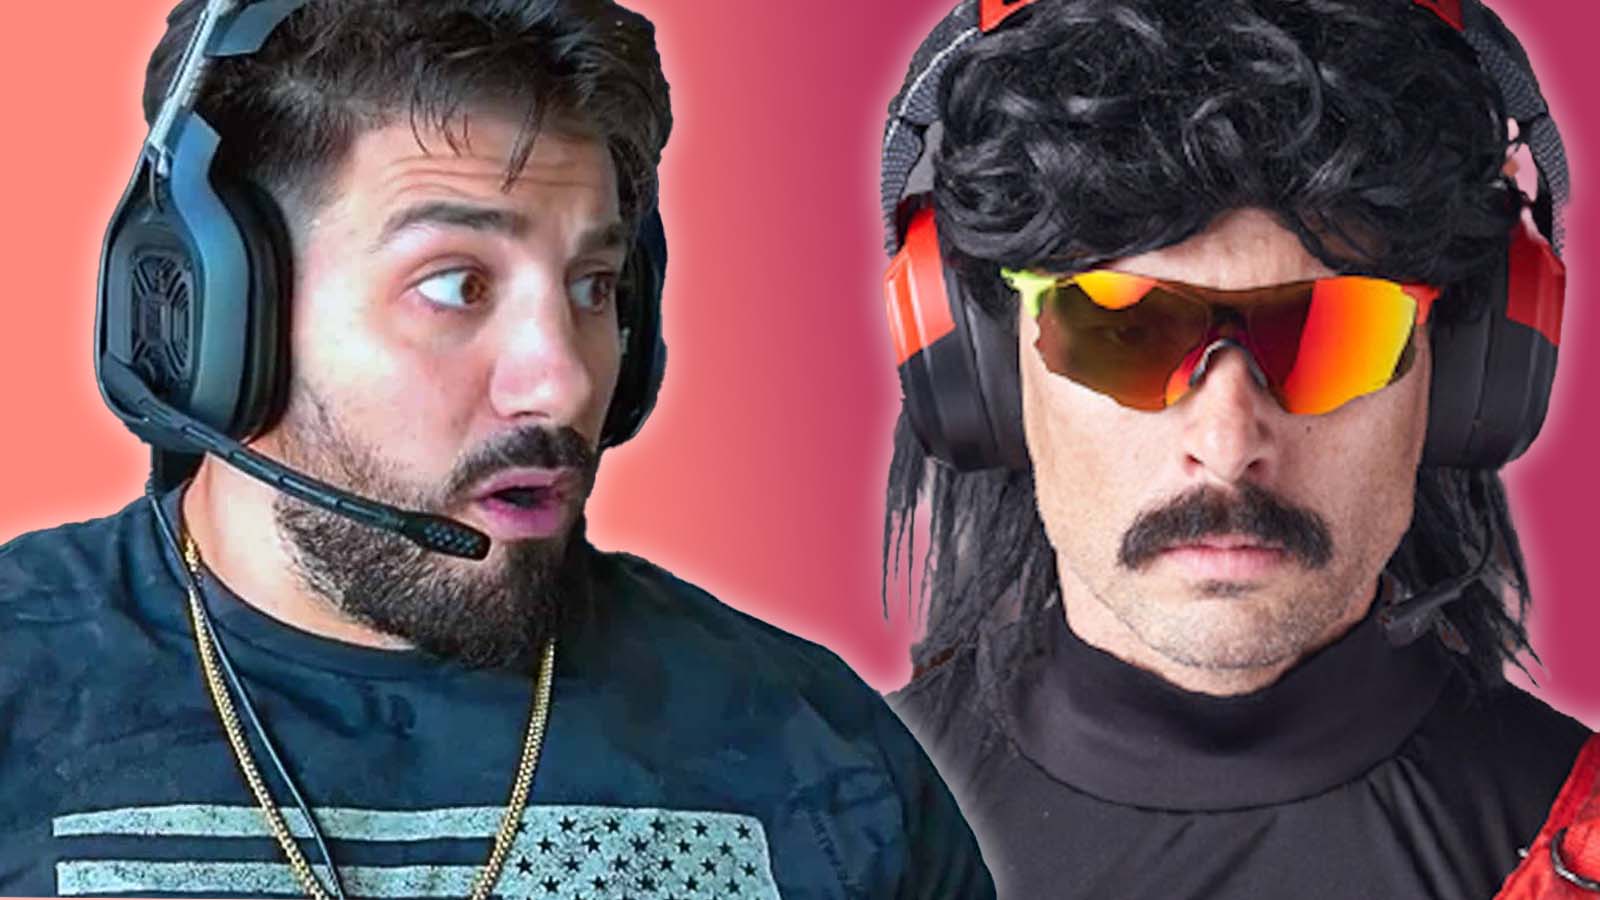 NICKMERCS takes swipe at dr disrespect over nfts